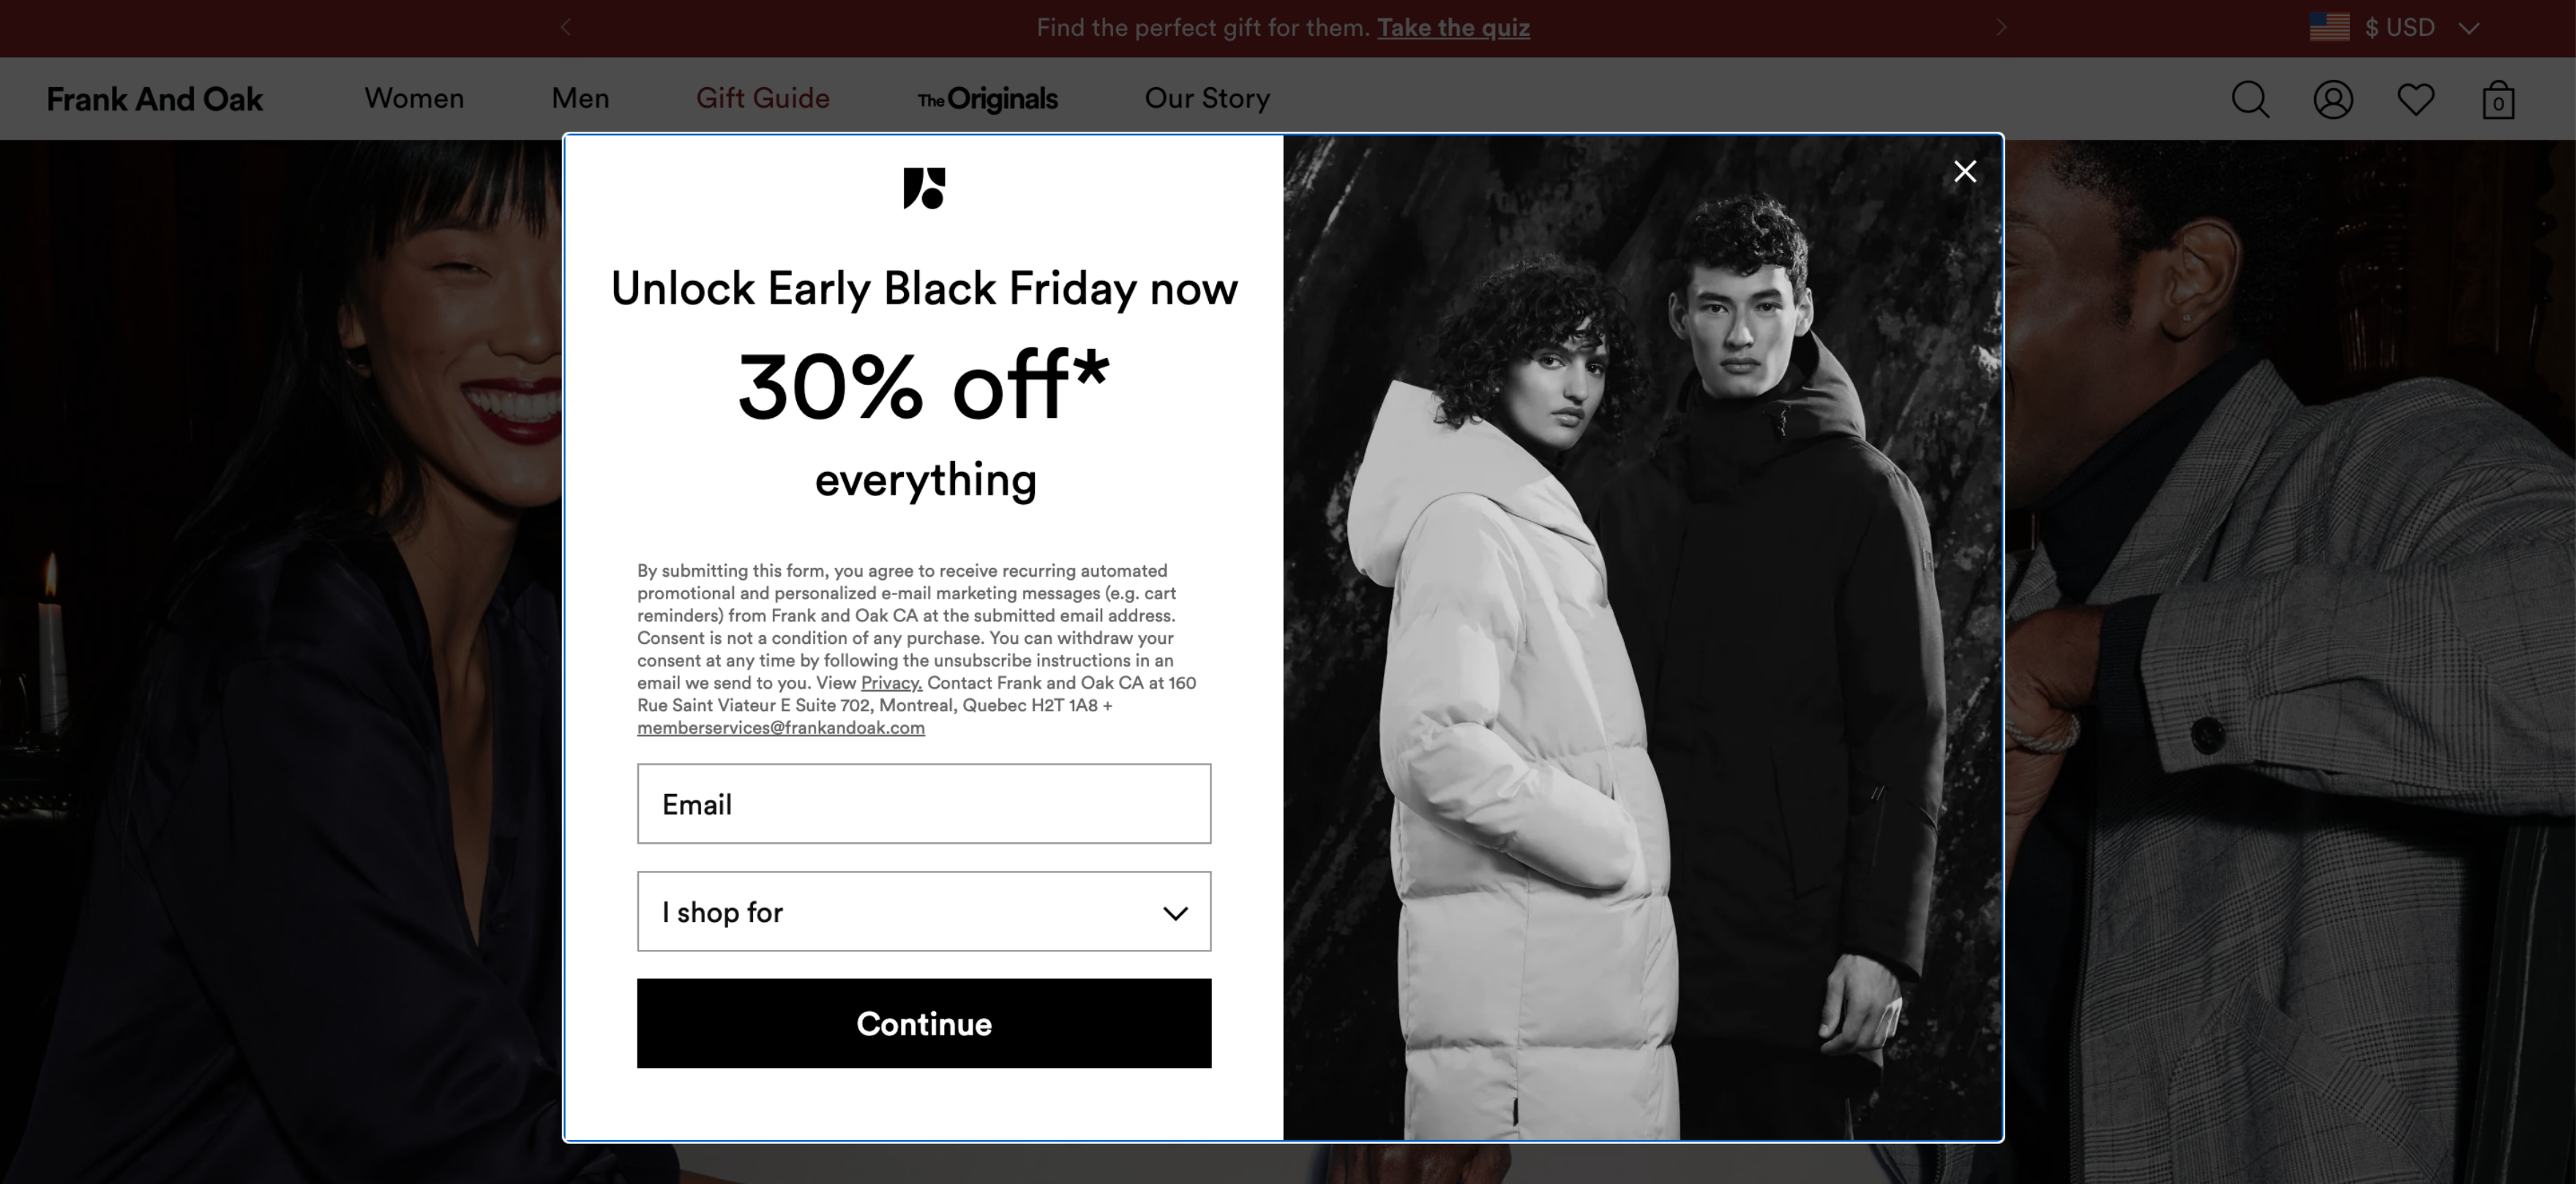 early black friday deal - frank and oak e-commerce